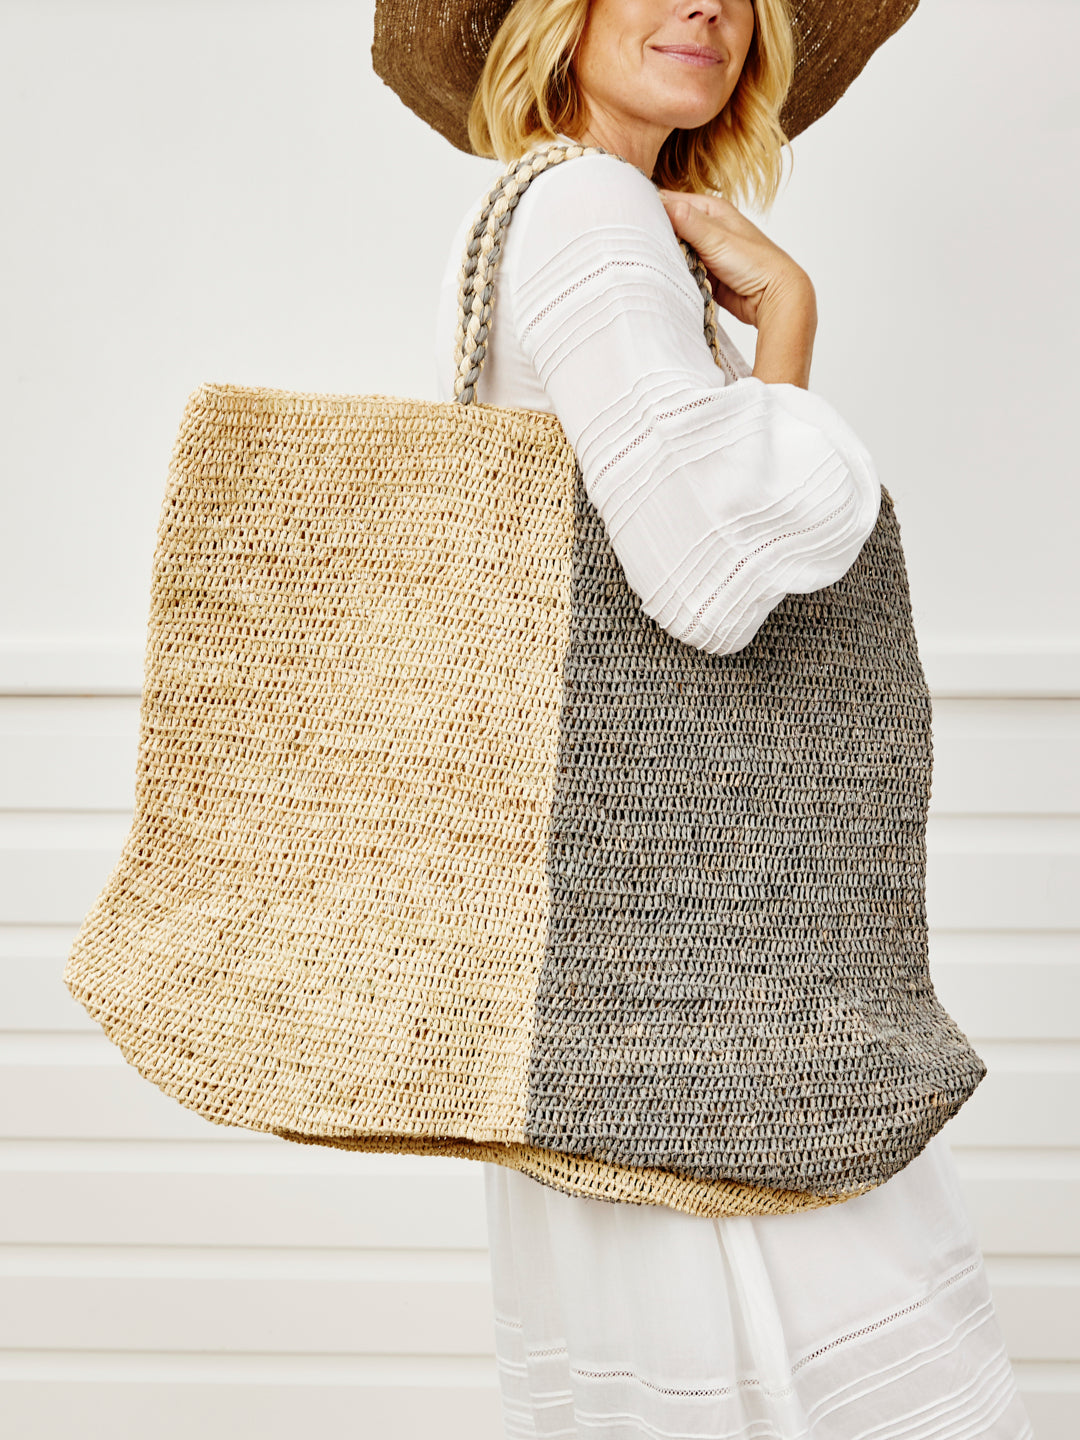 Driftwood Tote - Two-Tone